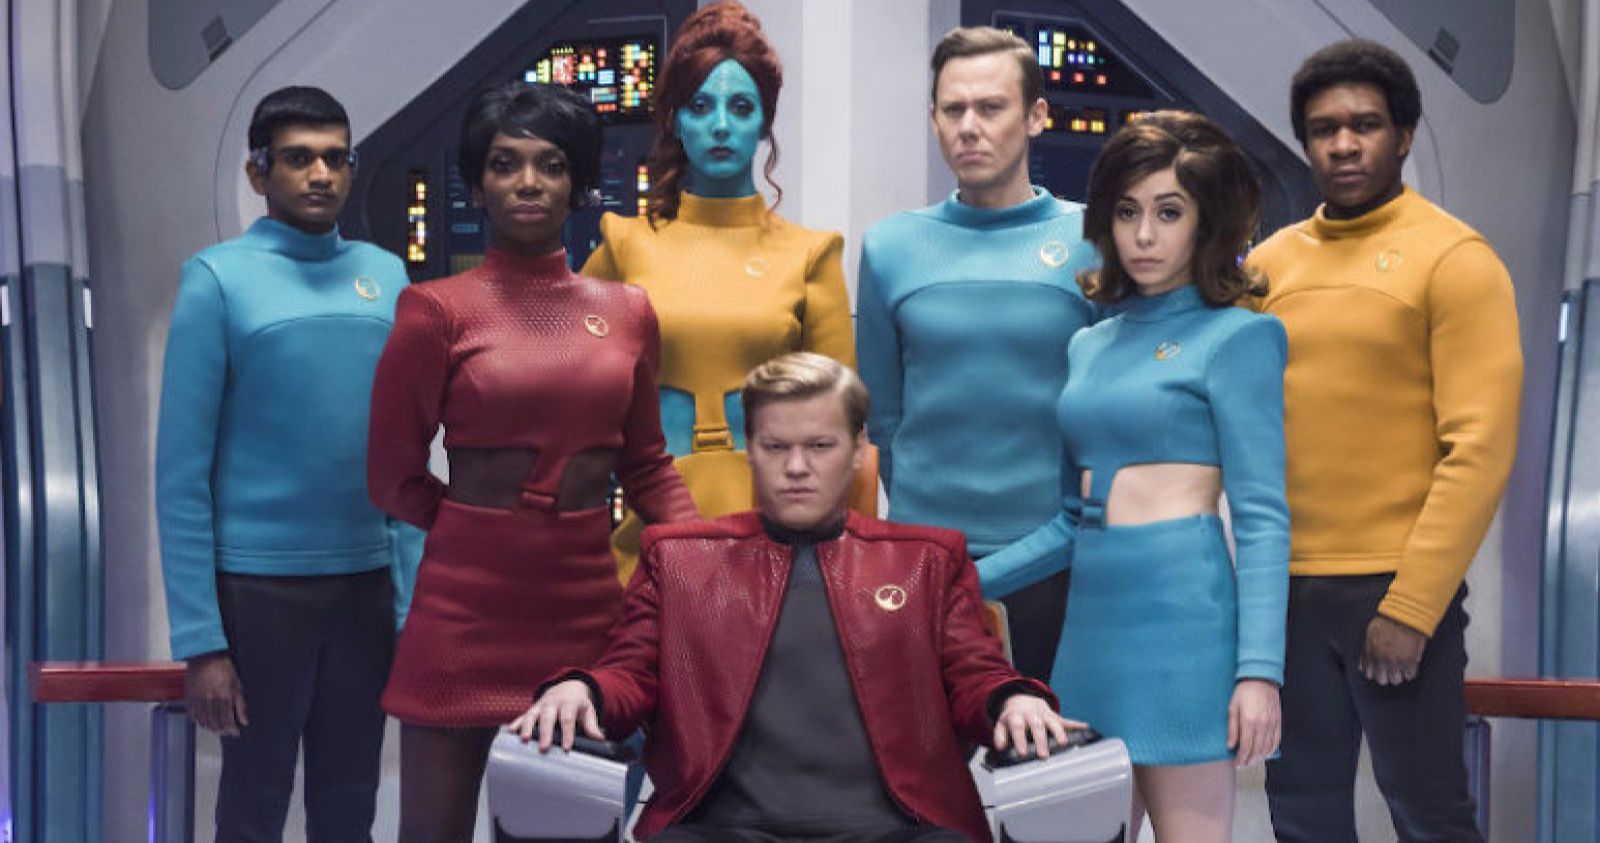 Black Mirror Creator Gives Season 6 Update, Teases USS Callister Spin-Off